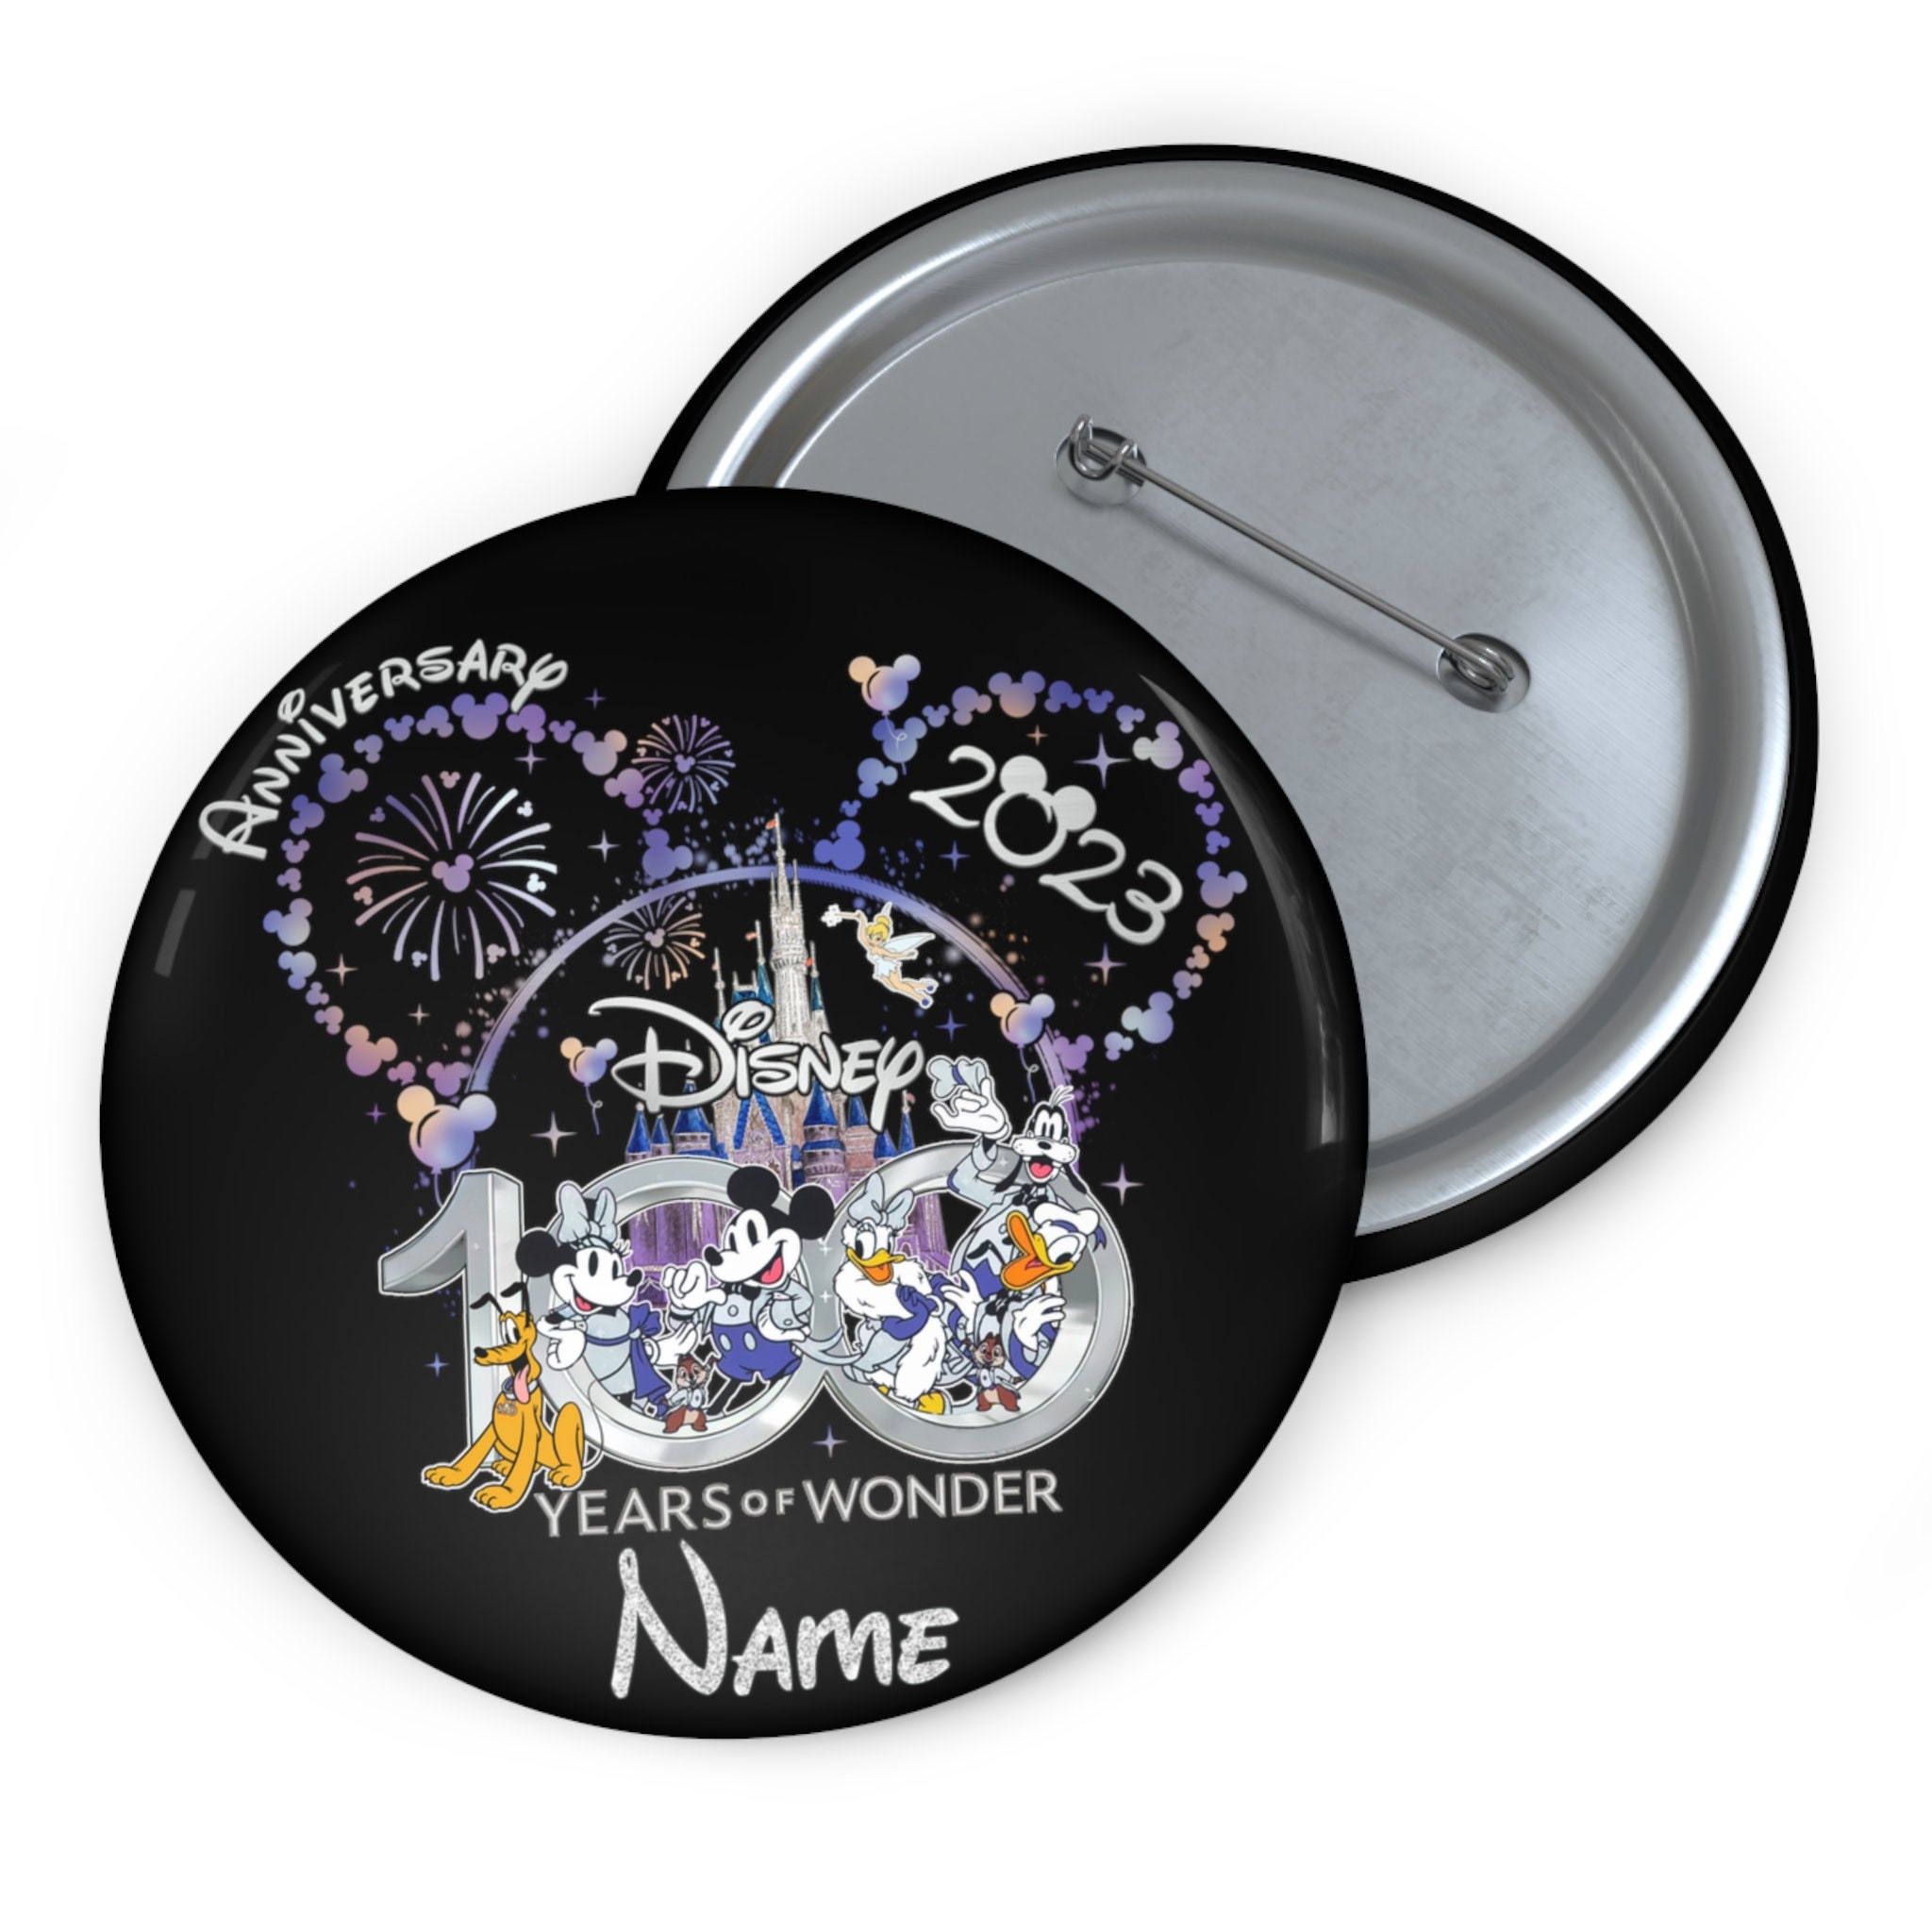 Celebrate Disney100 with Engraveable ID Tags